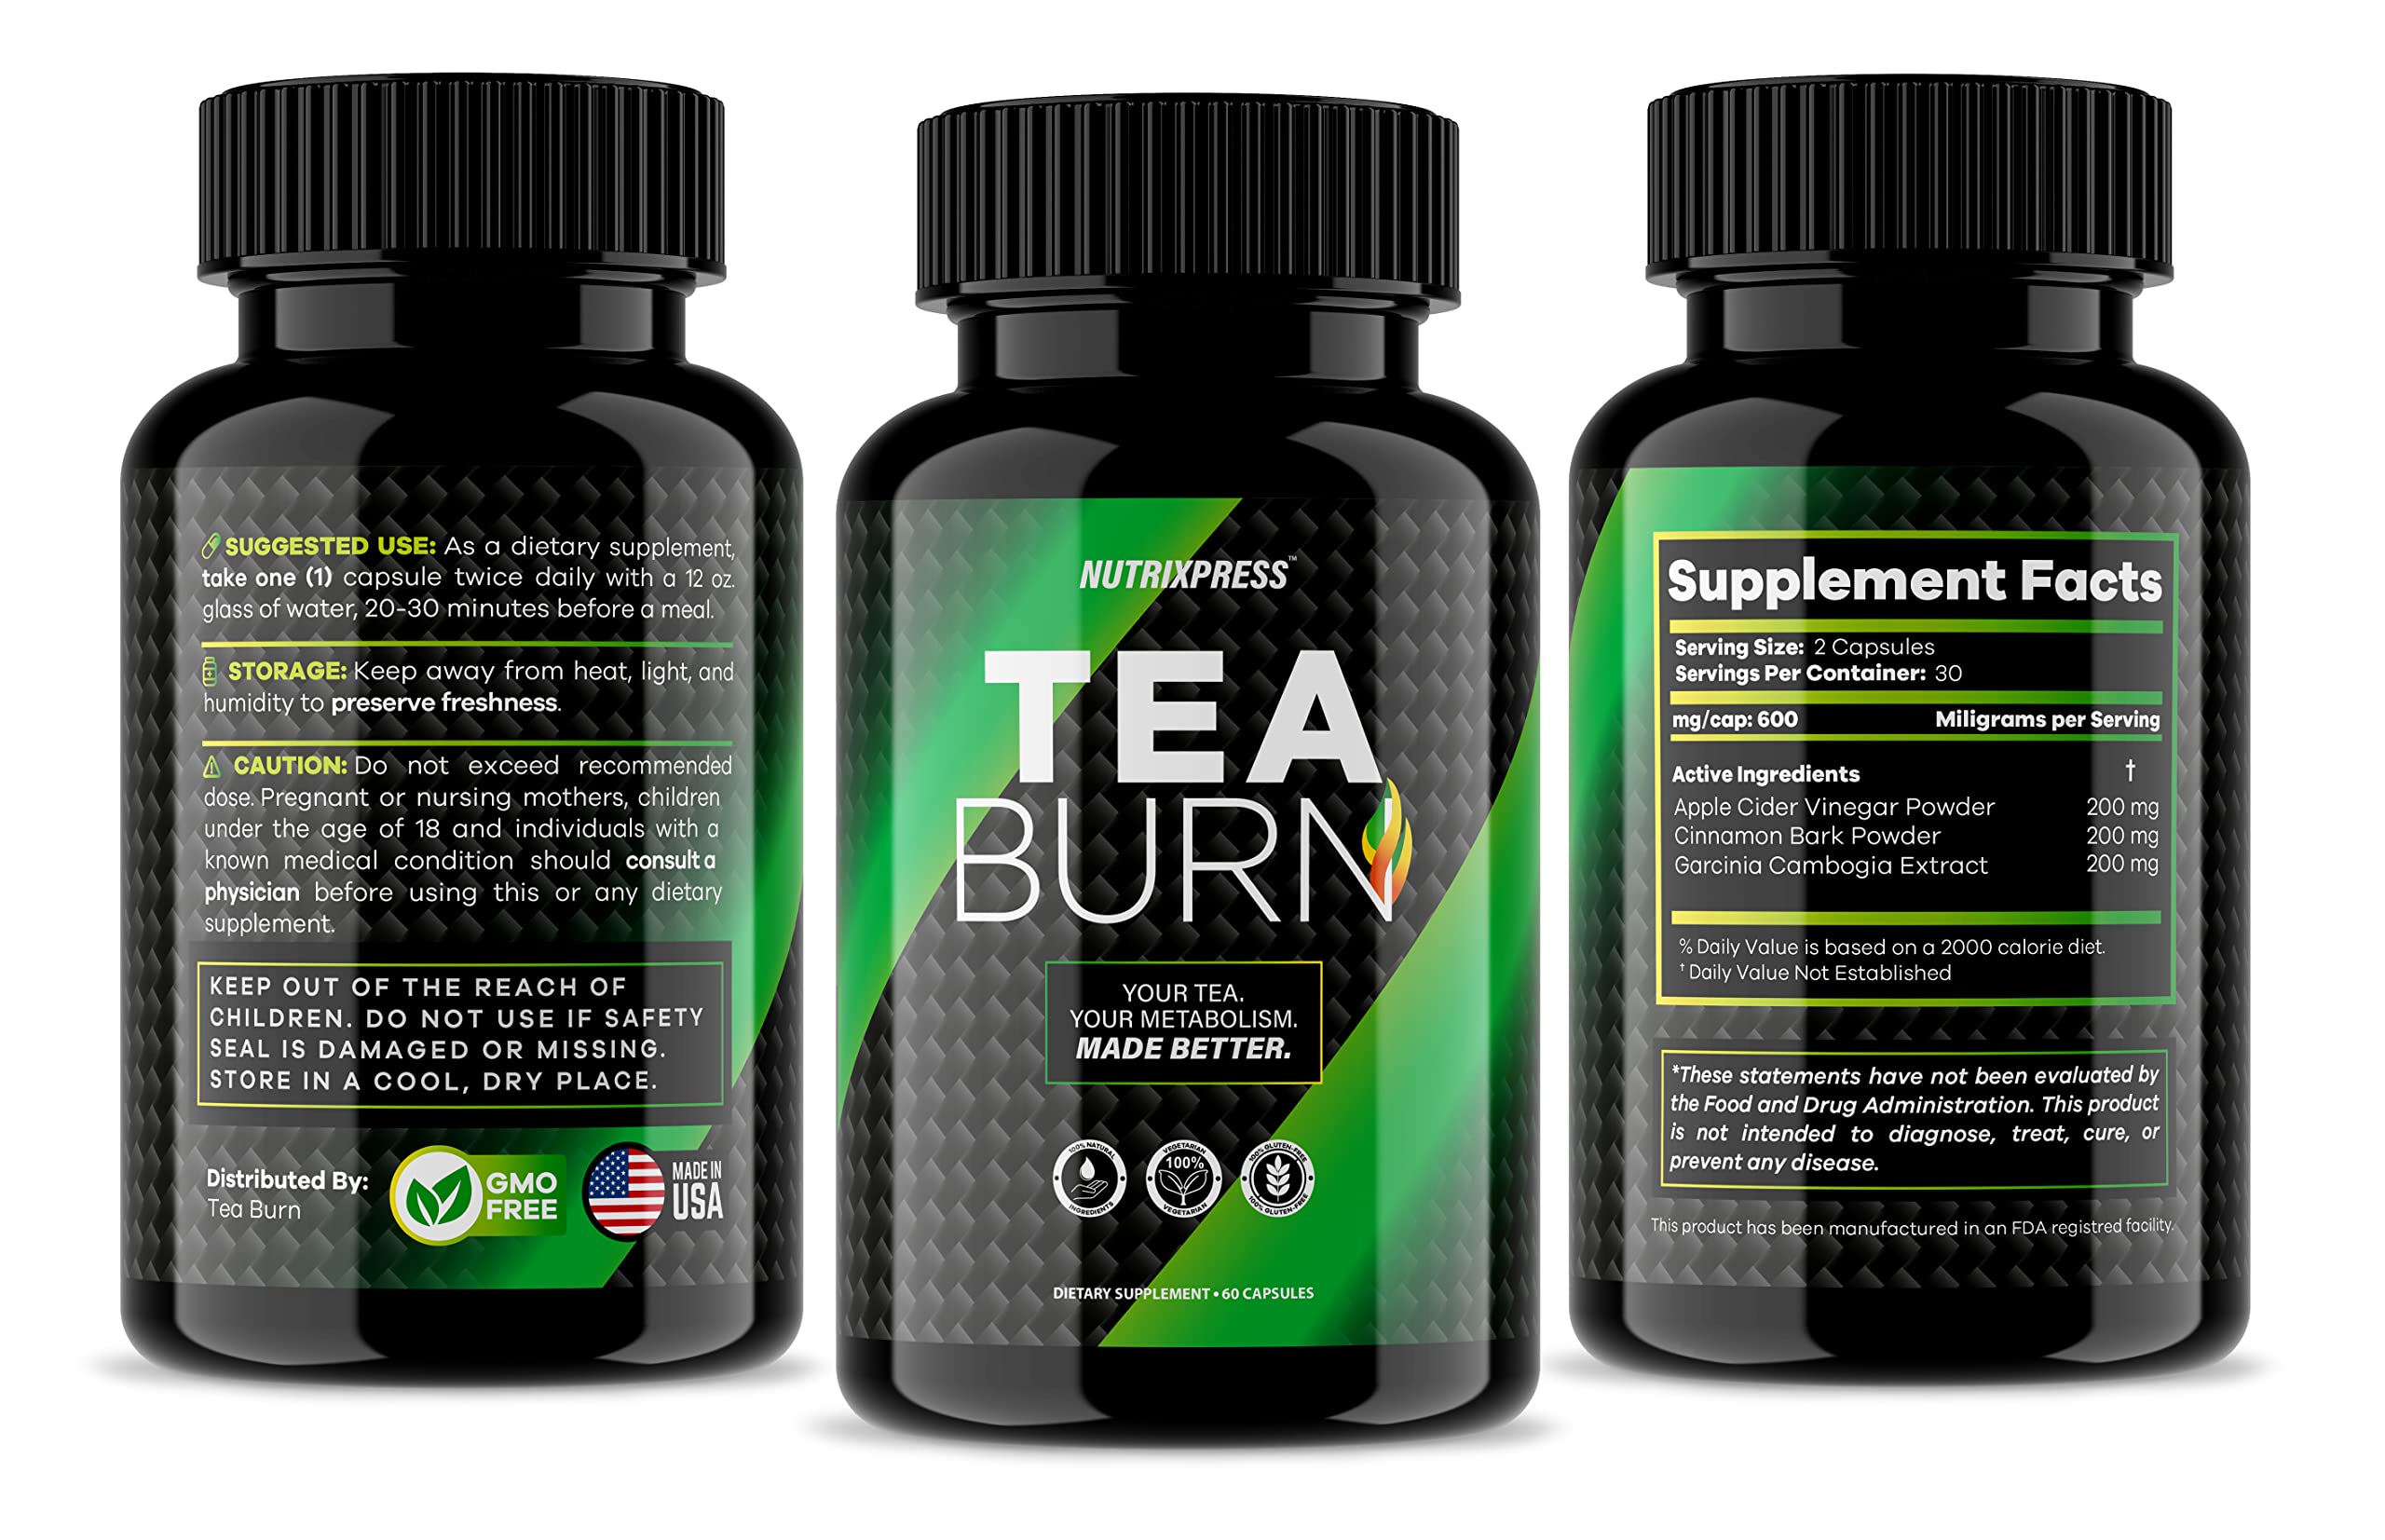 1 Pack - TeaBurn Now in Pills - New Revamped Revolutionary Tea Burn Formula, Powder Packets for Healthy Control, Effective for Women and Men, 30 Days Supply